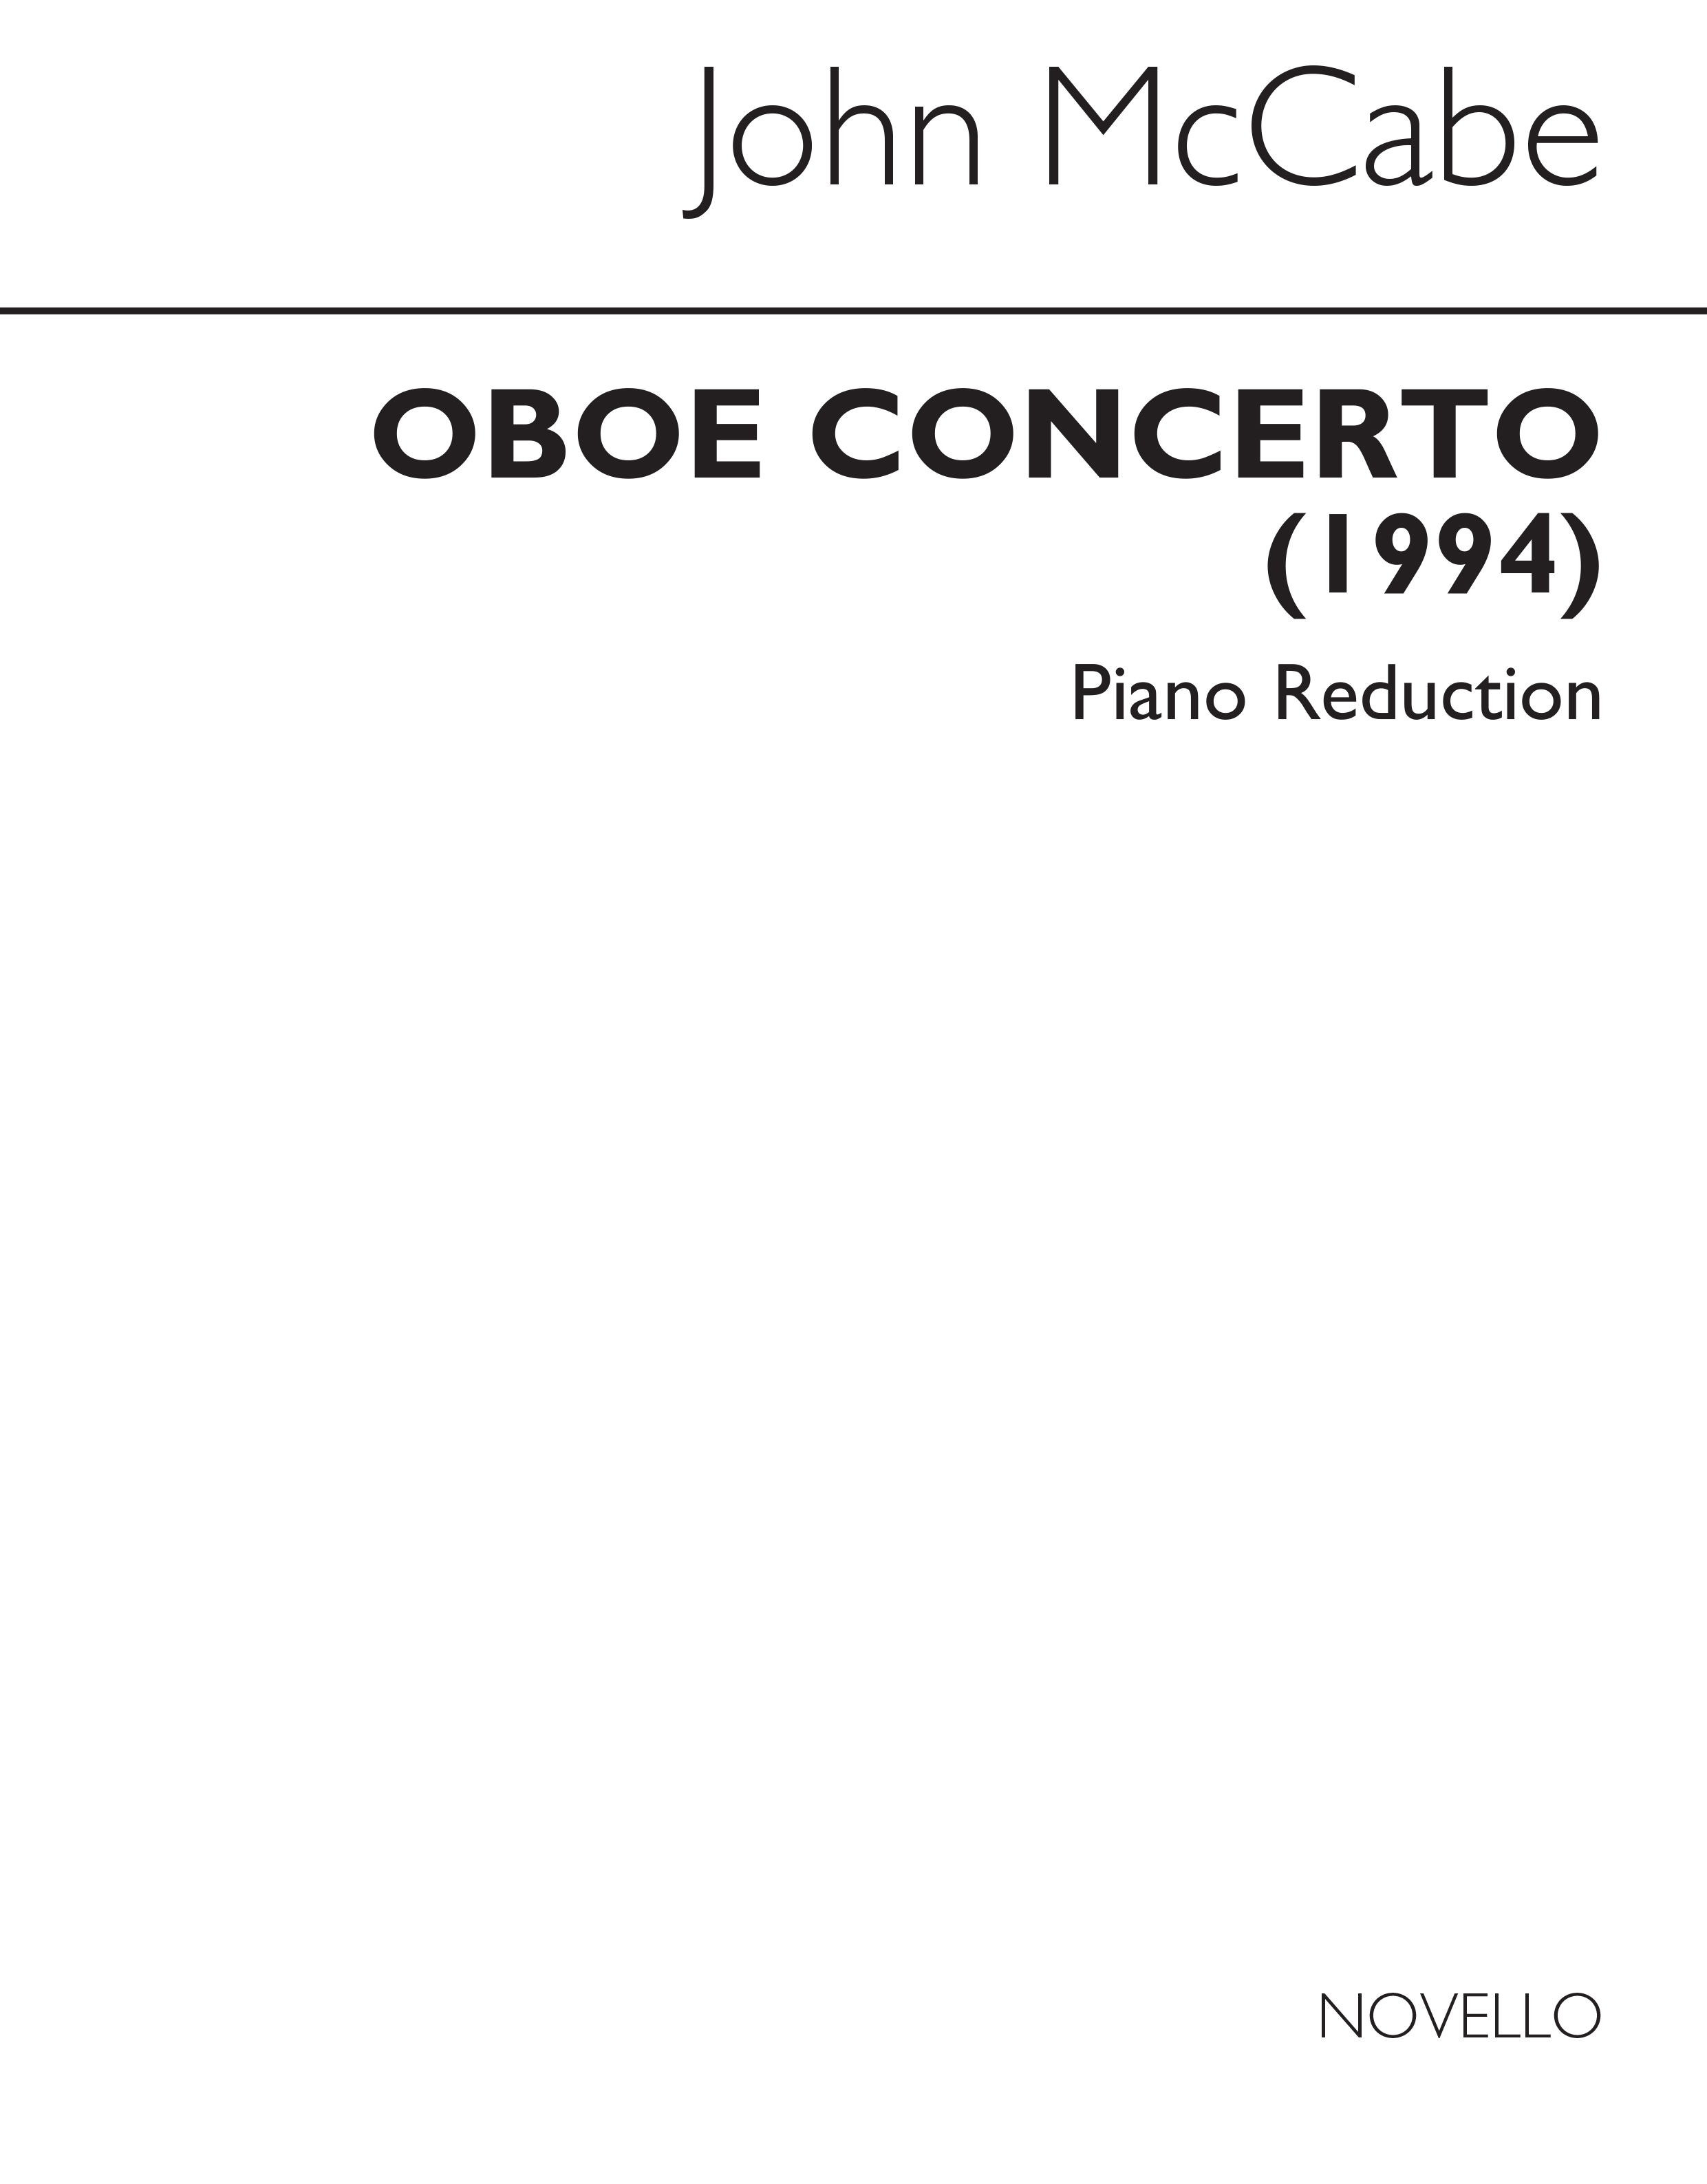 McCabe: Concerto For Oboe (with Piano Reduction)